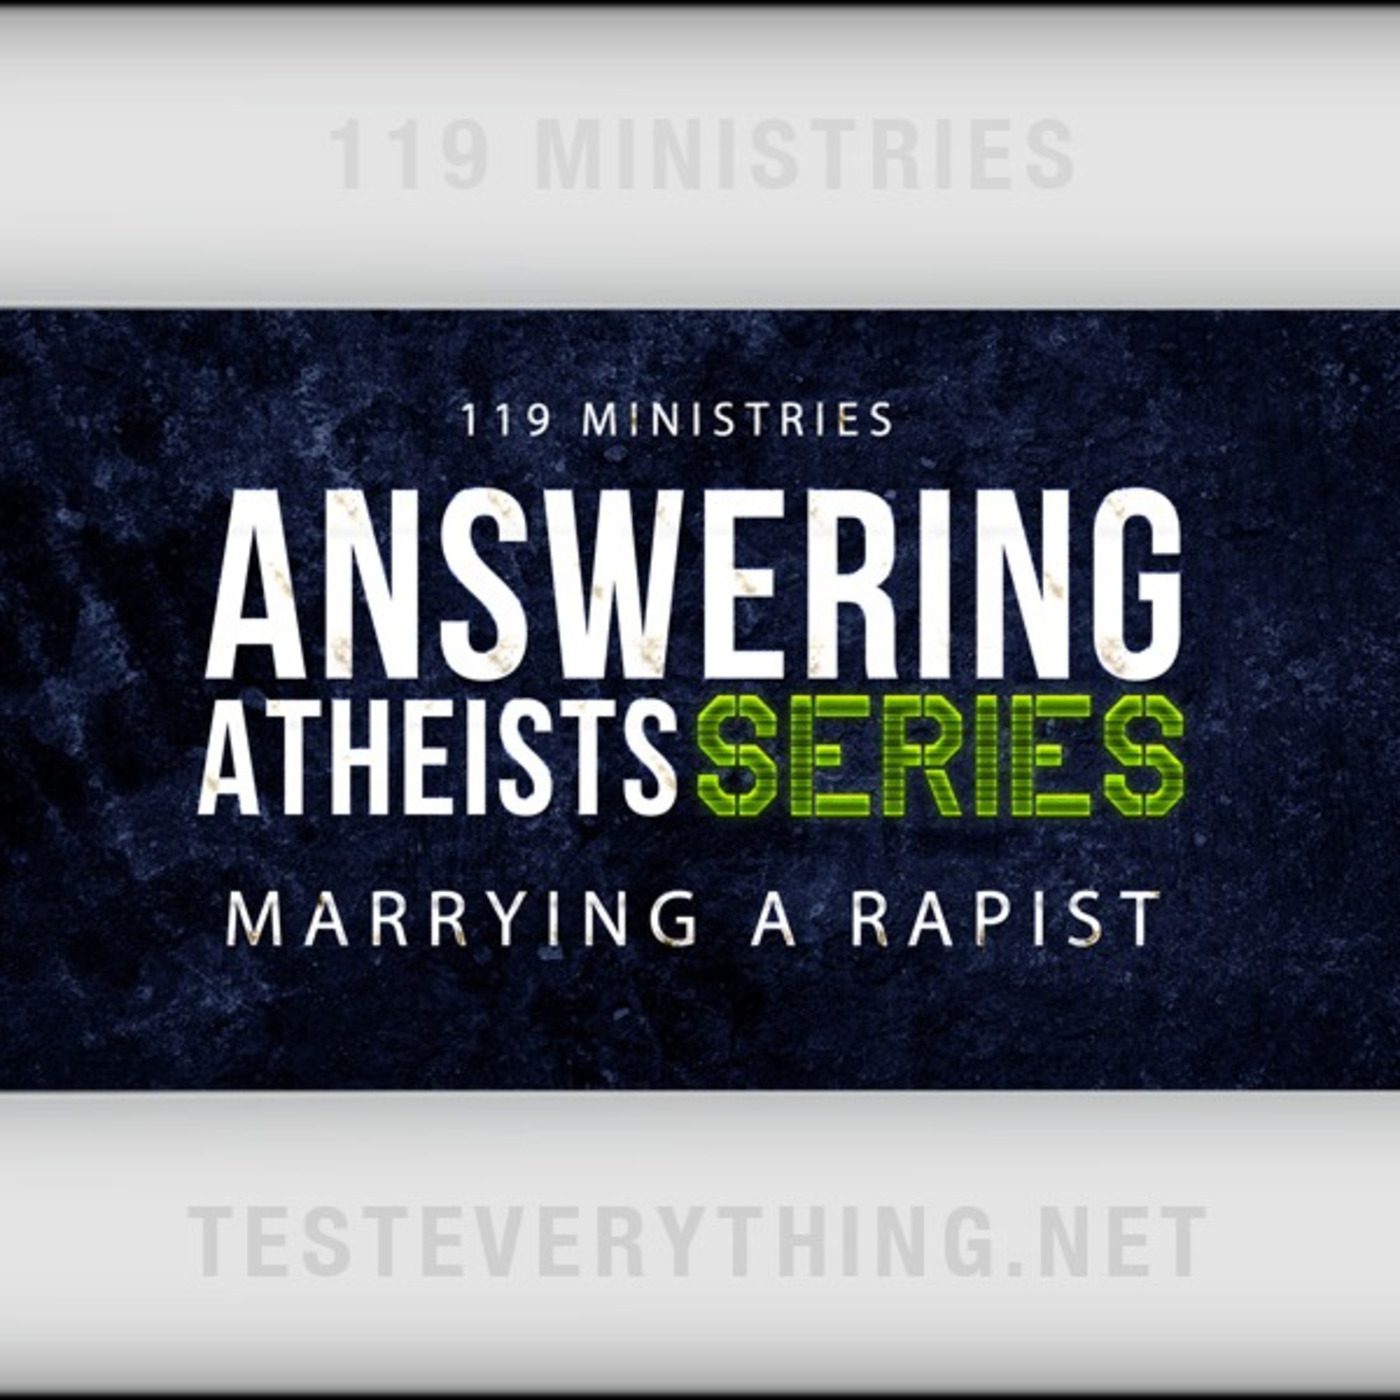 Answering Atheists: Marrying A Rapist